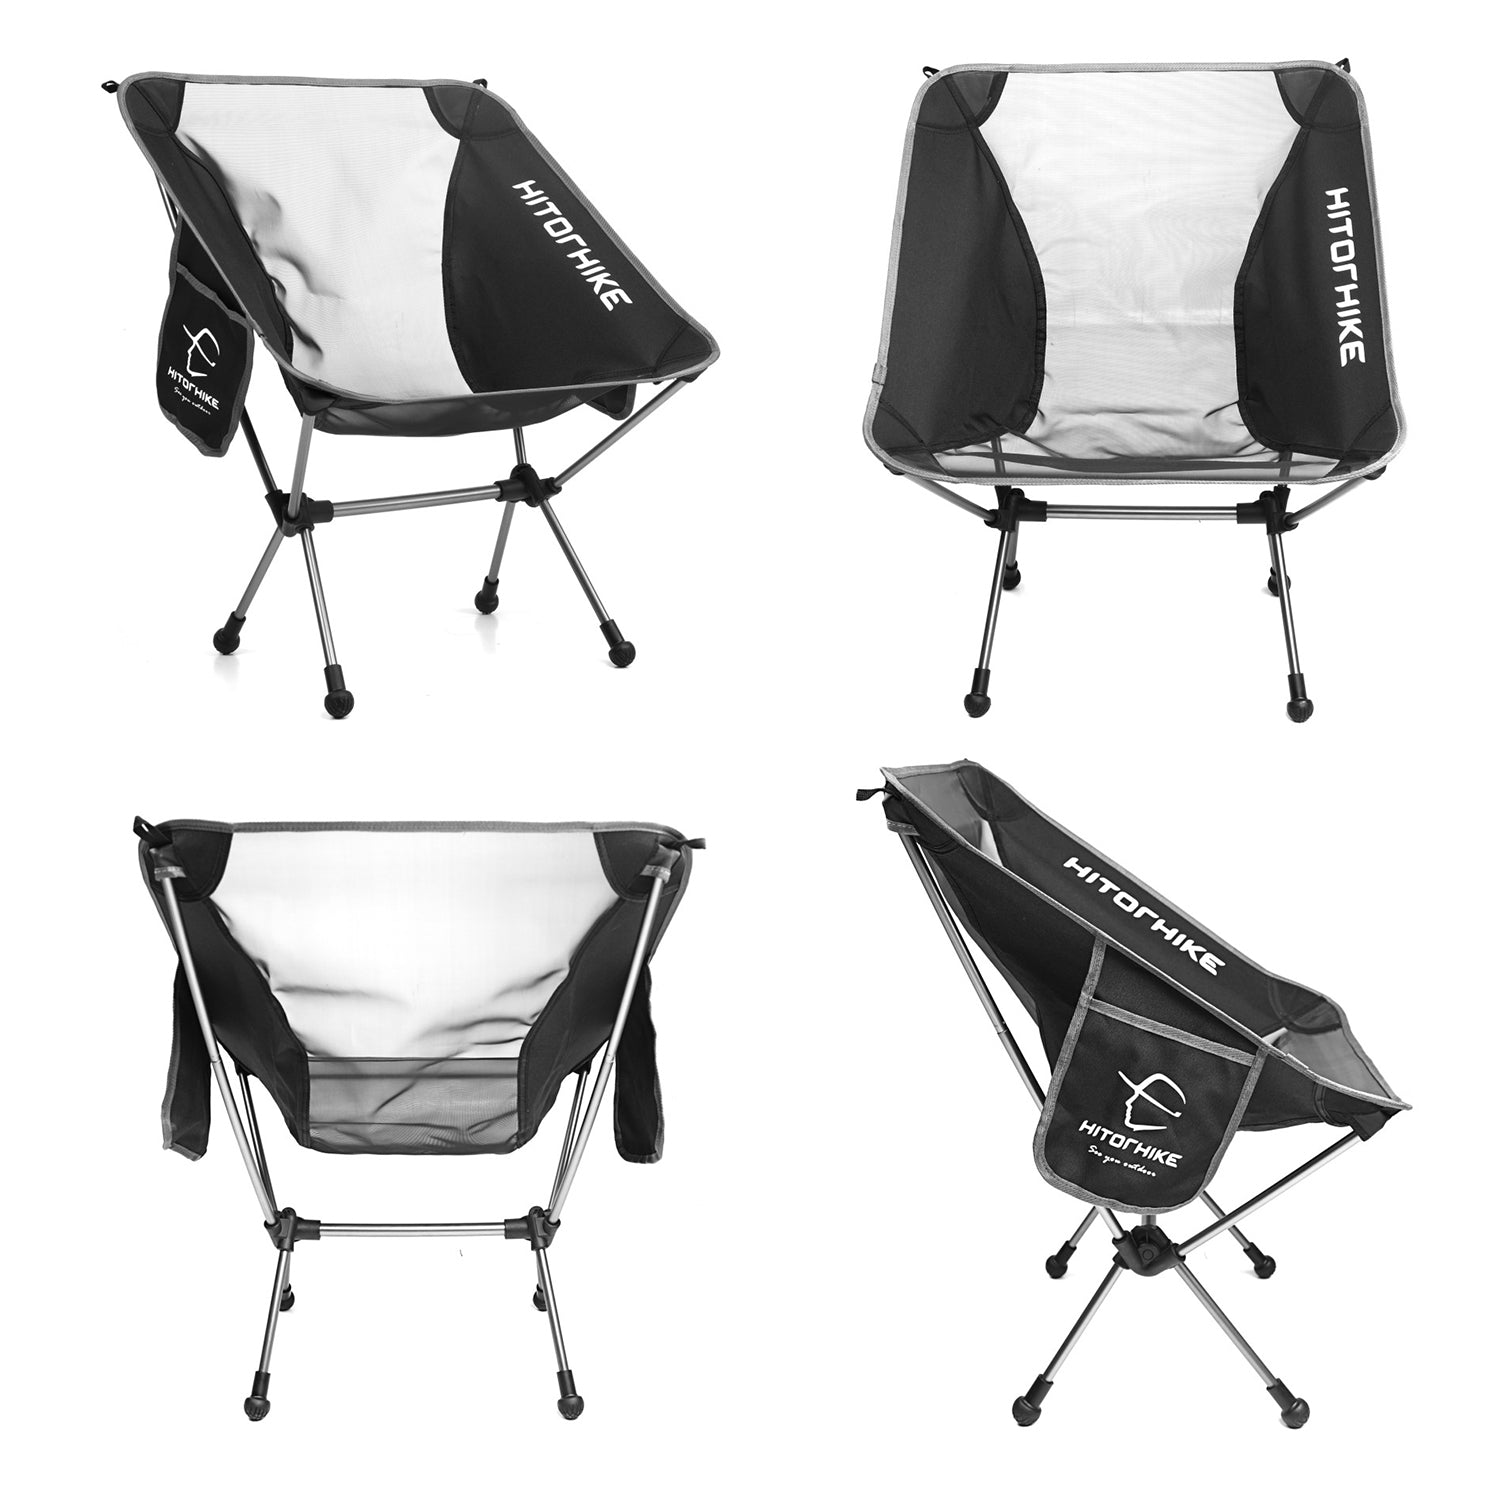 Hitorhike Camping Chair Breathable Mesh Construction 2 Side Pockets Aluminum Frame Camp Chair with Carry Bag 2PCS